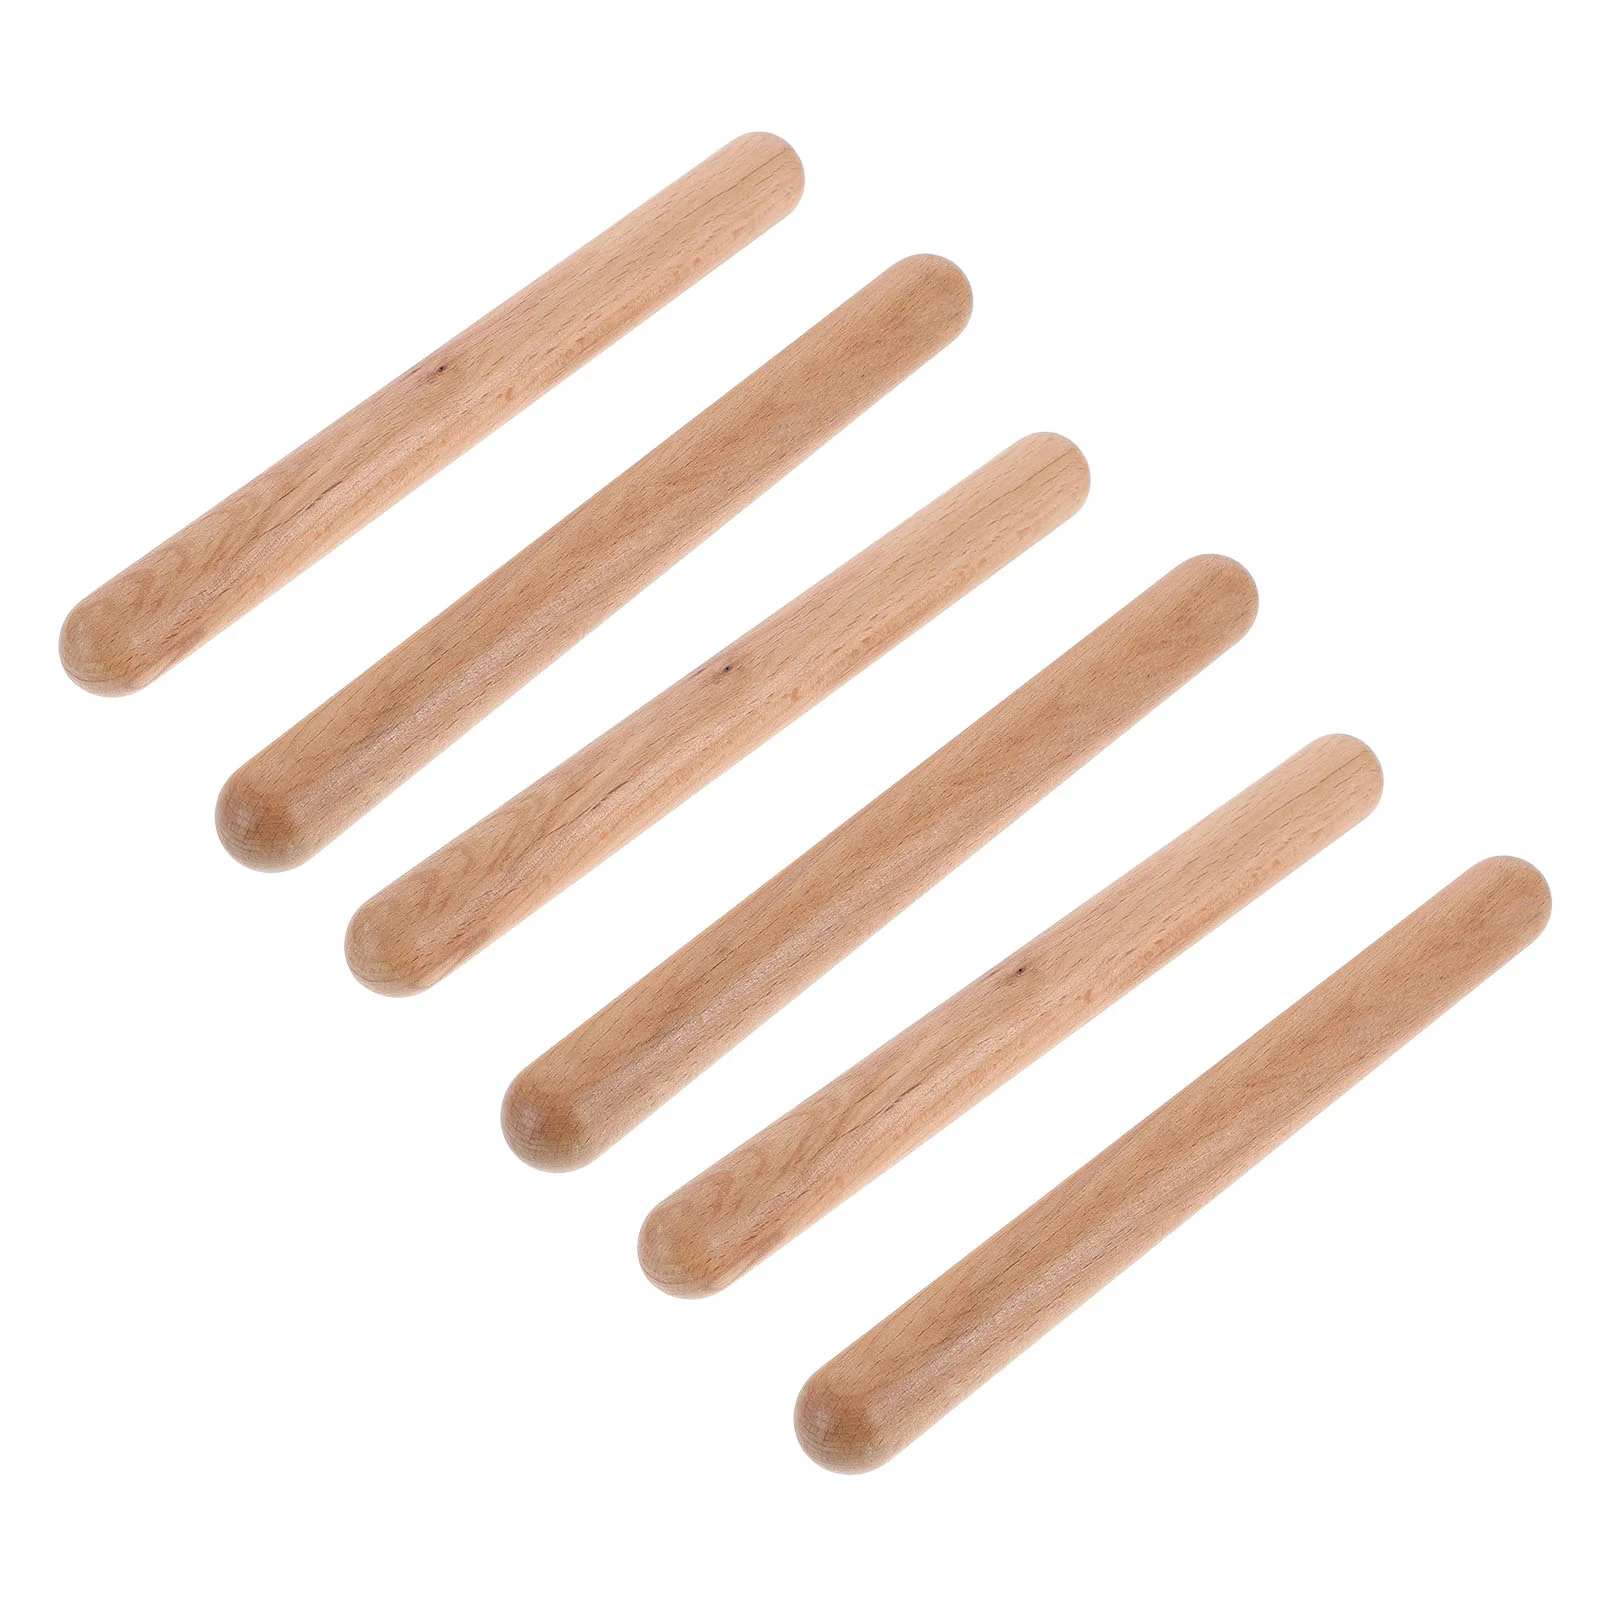 

3 Pairs Solid Hardwood Claves Percussion Instrument Rhythm Sticks for Kids Children Beginners